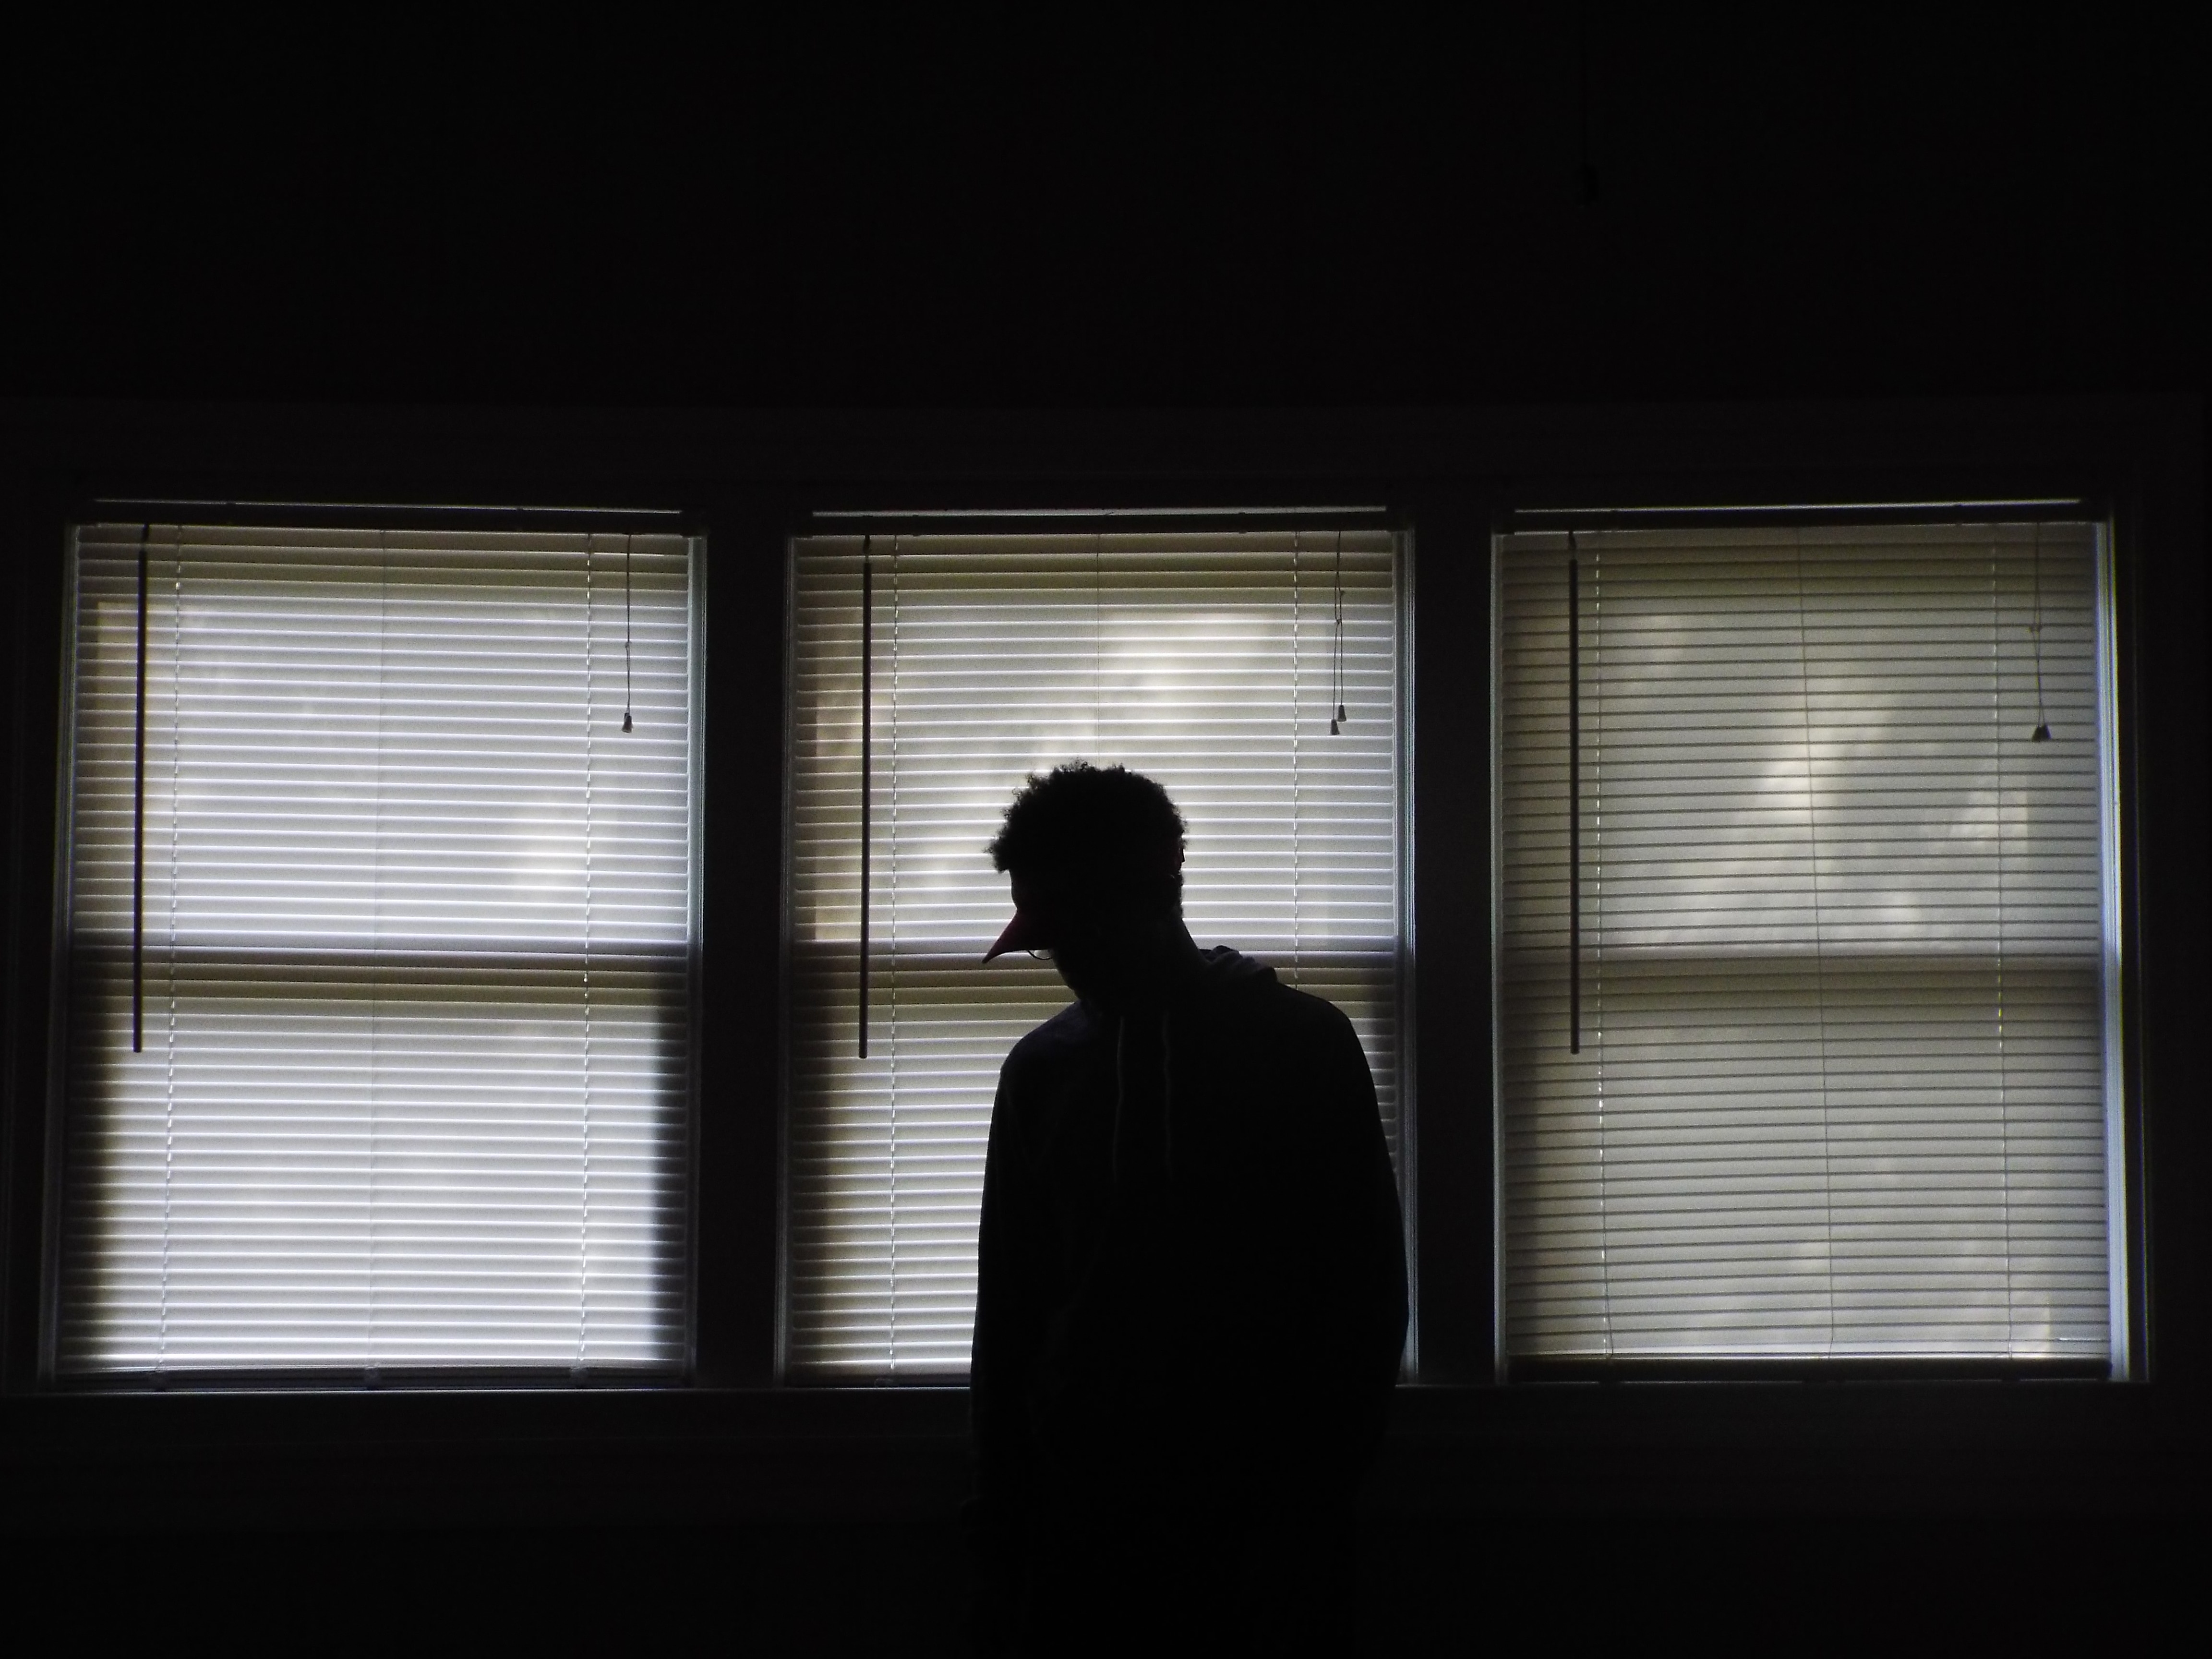 silhouette of a man beside window blinds during daytime